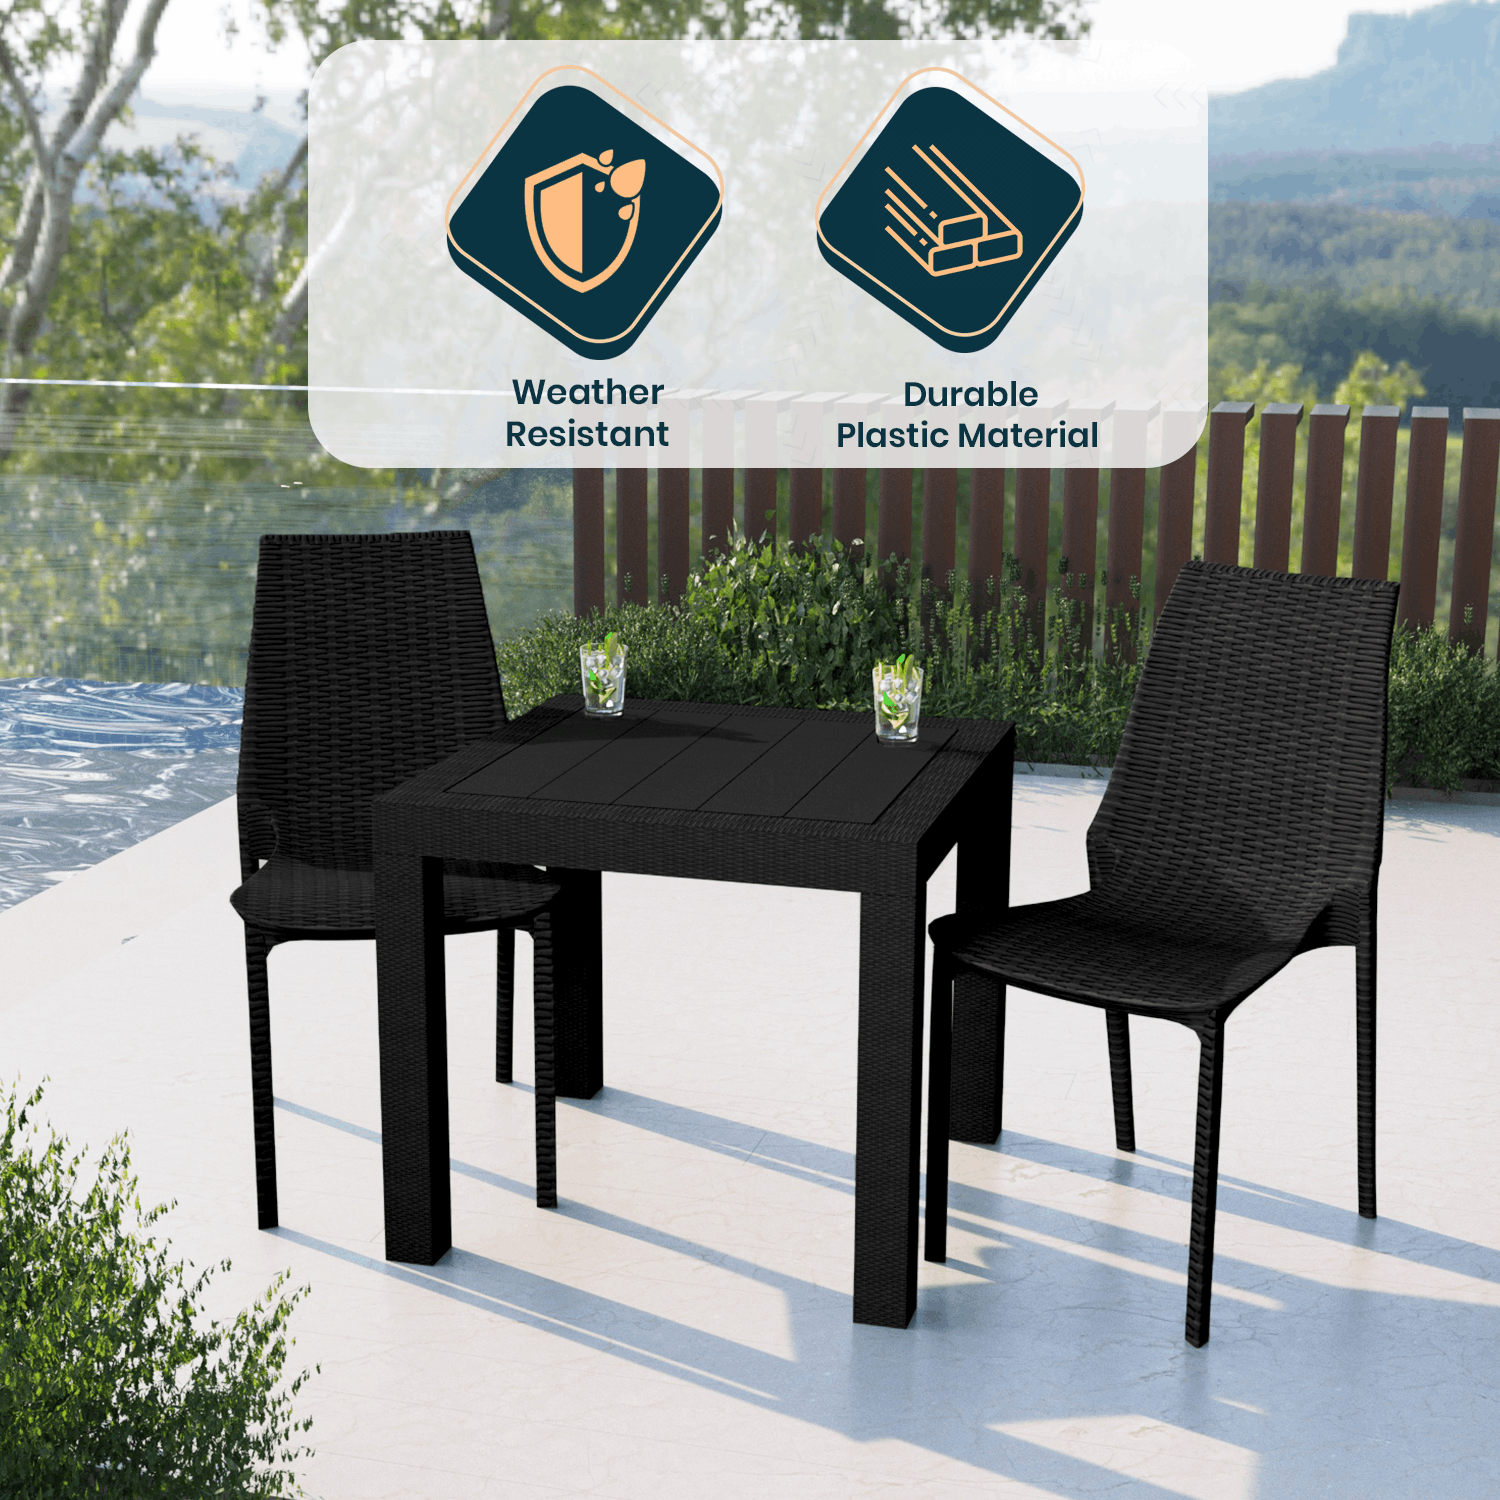 LeisureMod Kent Mid-Century Modern Weave Design 2-Piece Outdoor Patio Dining Set with Plastic Square Table and 2 Stackable Chairs for Patio, Poolside, and Backyard Garden (Black) - image 2 of 18